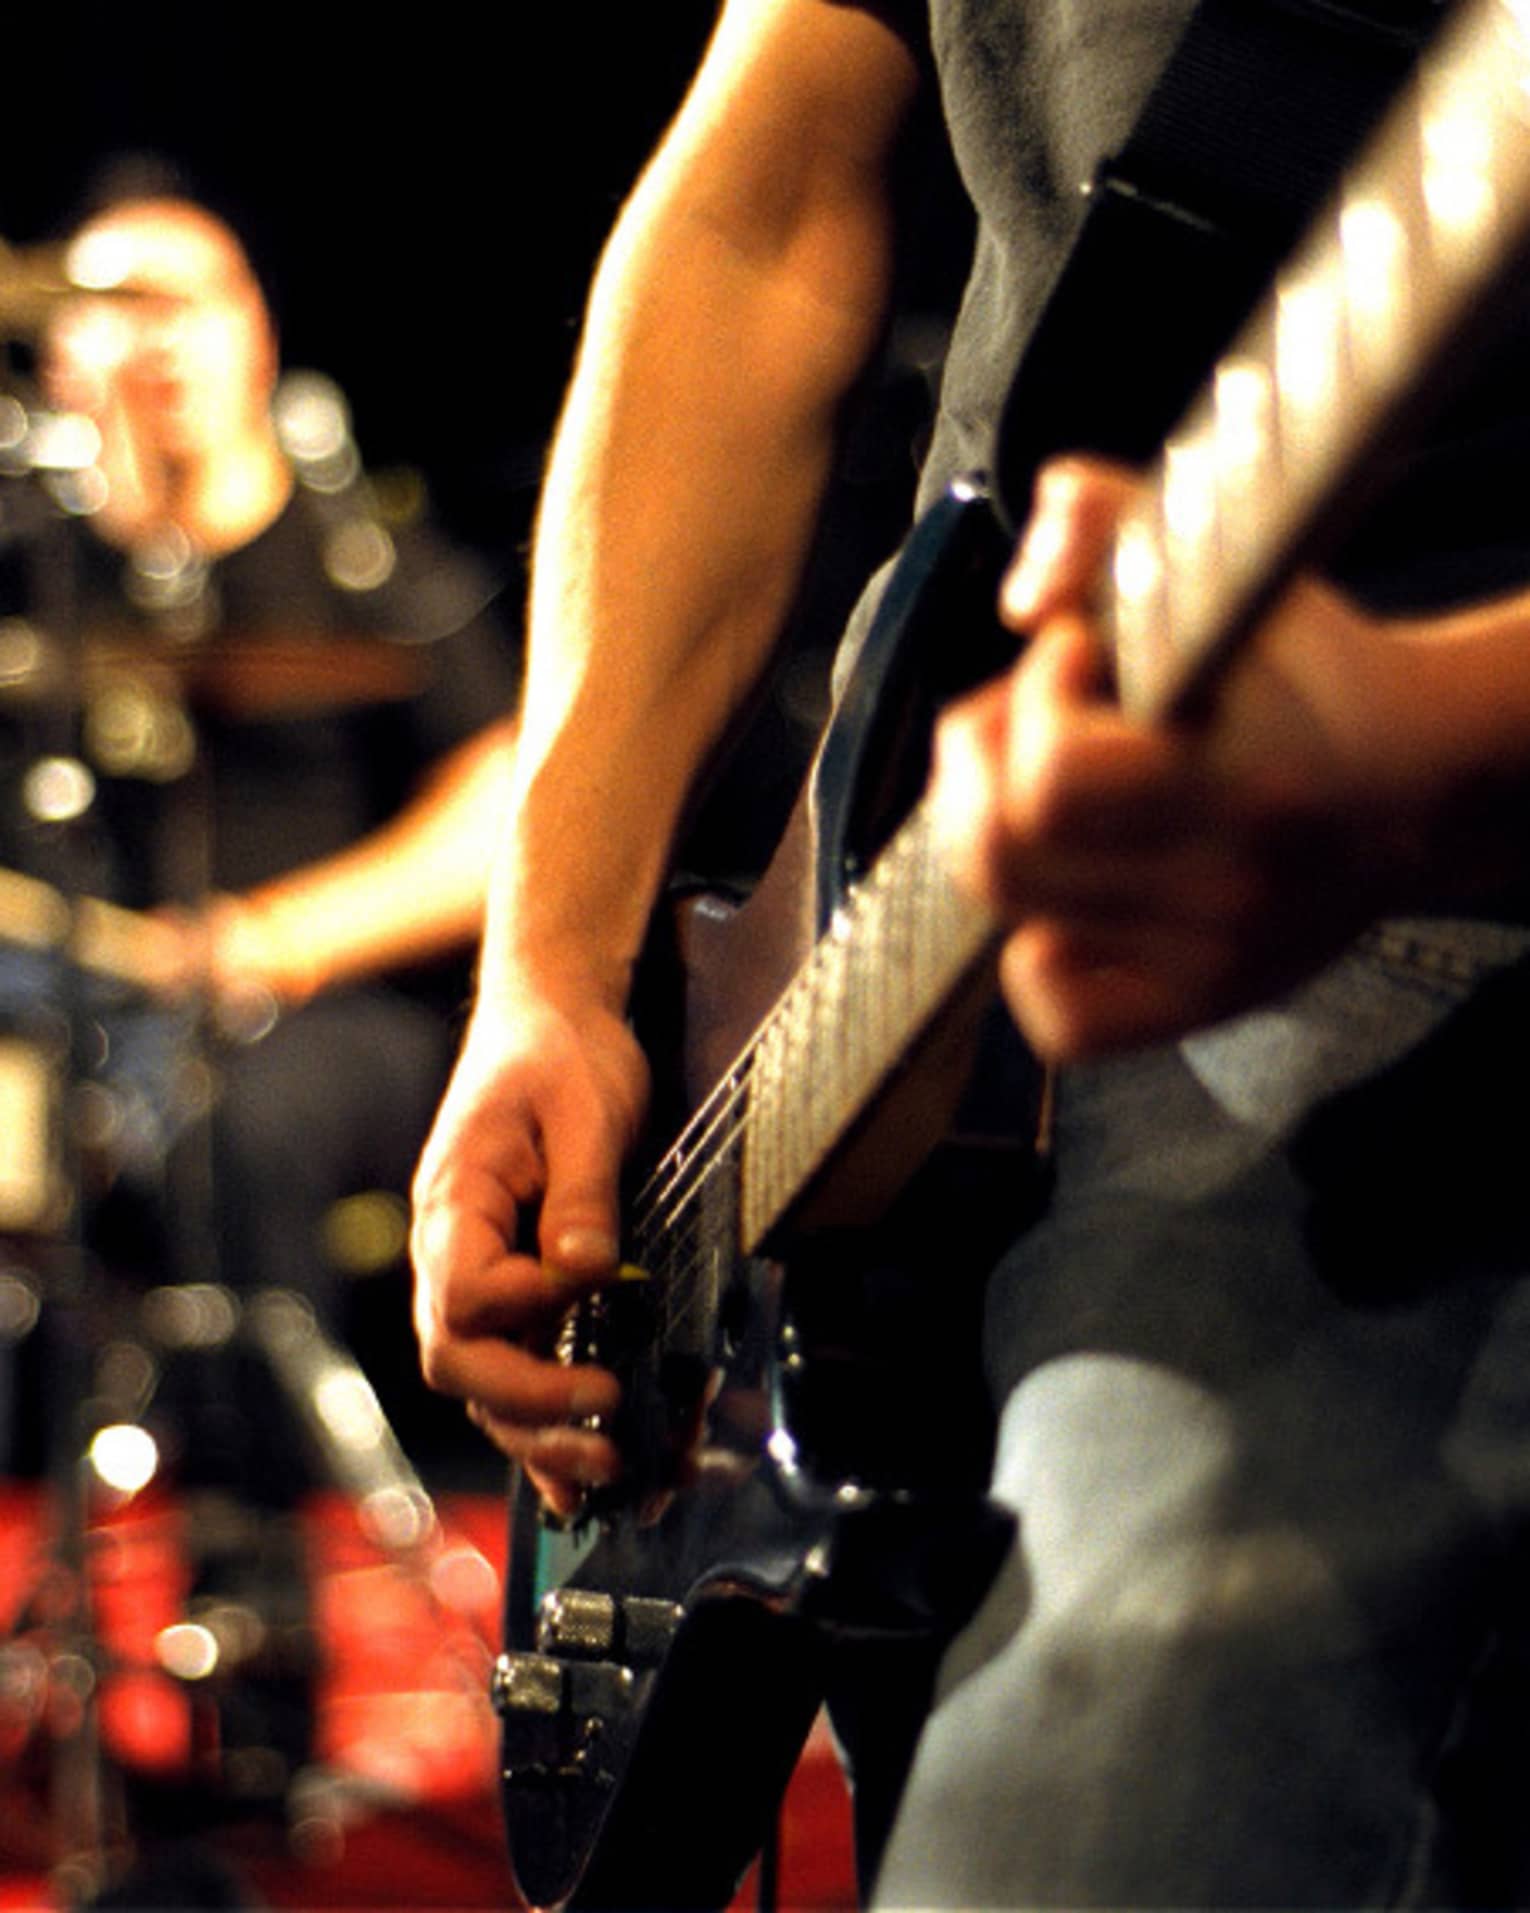 Close-up of musician's arms and hands playing an electric guitar with drumset in the background.